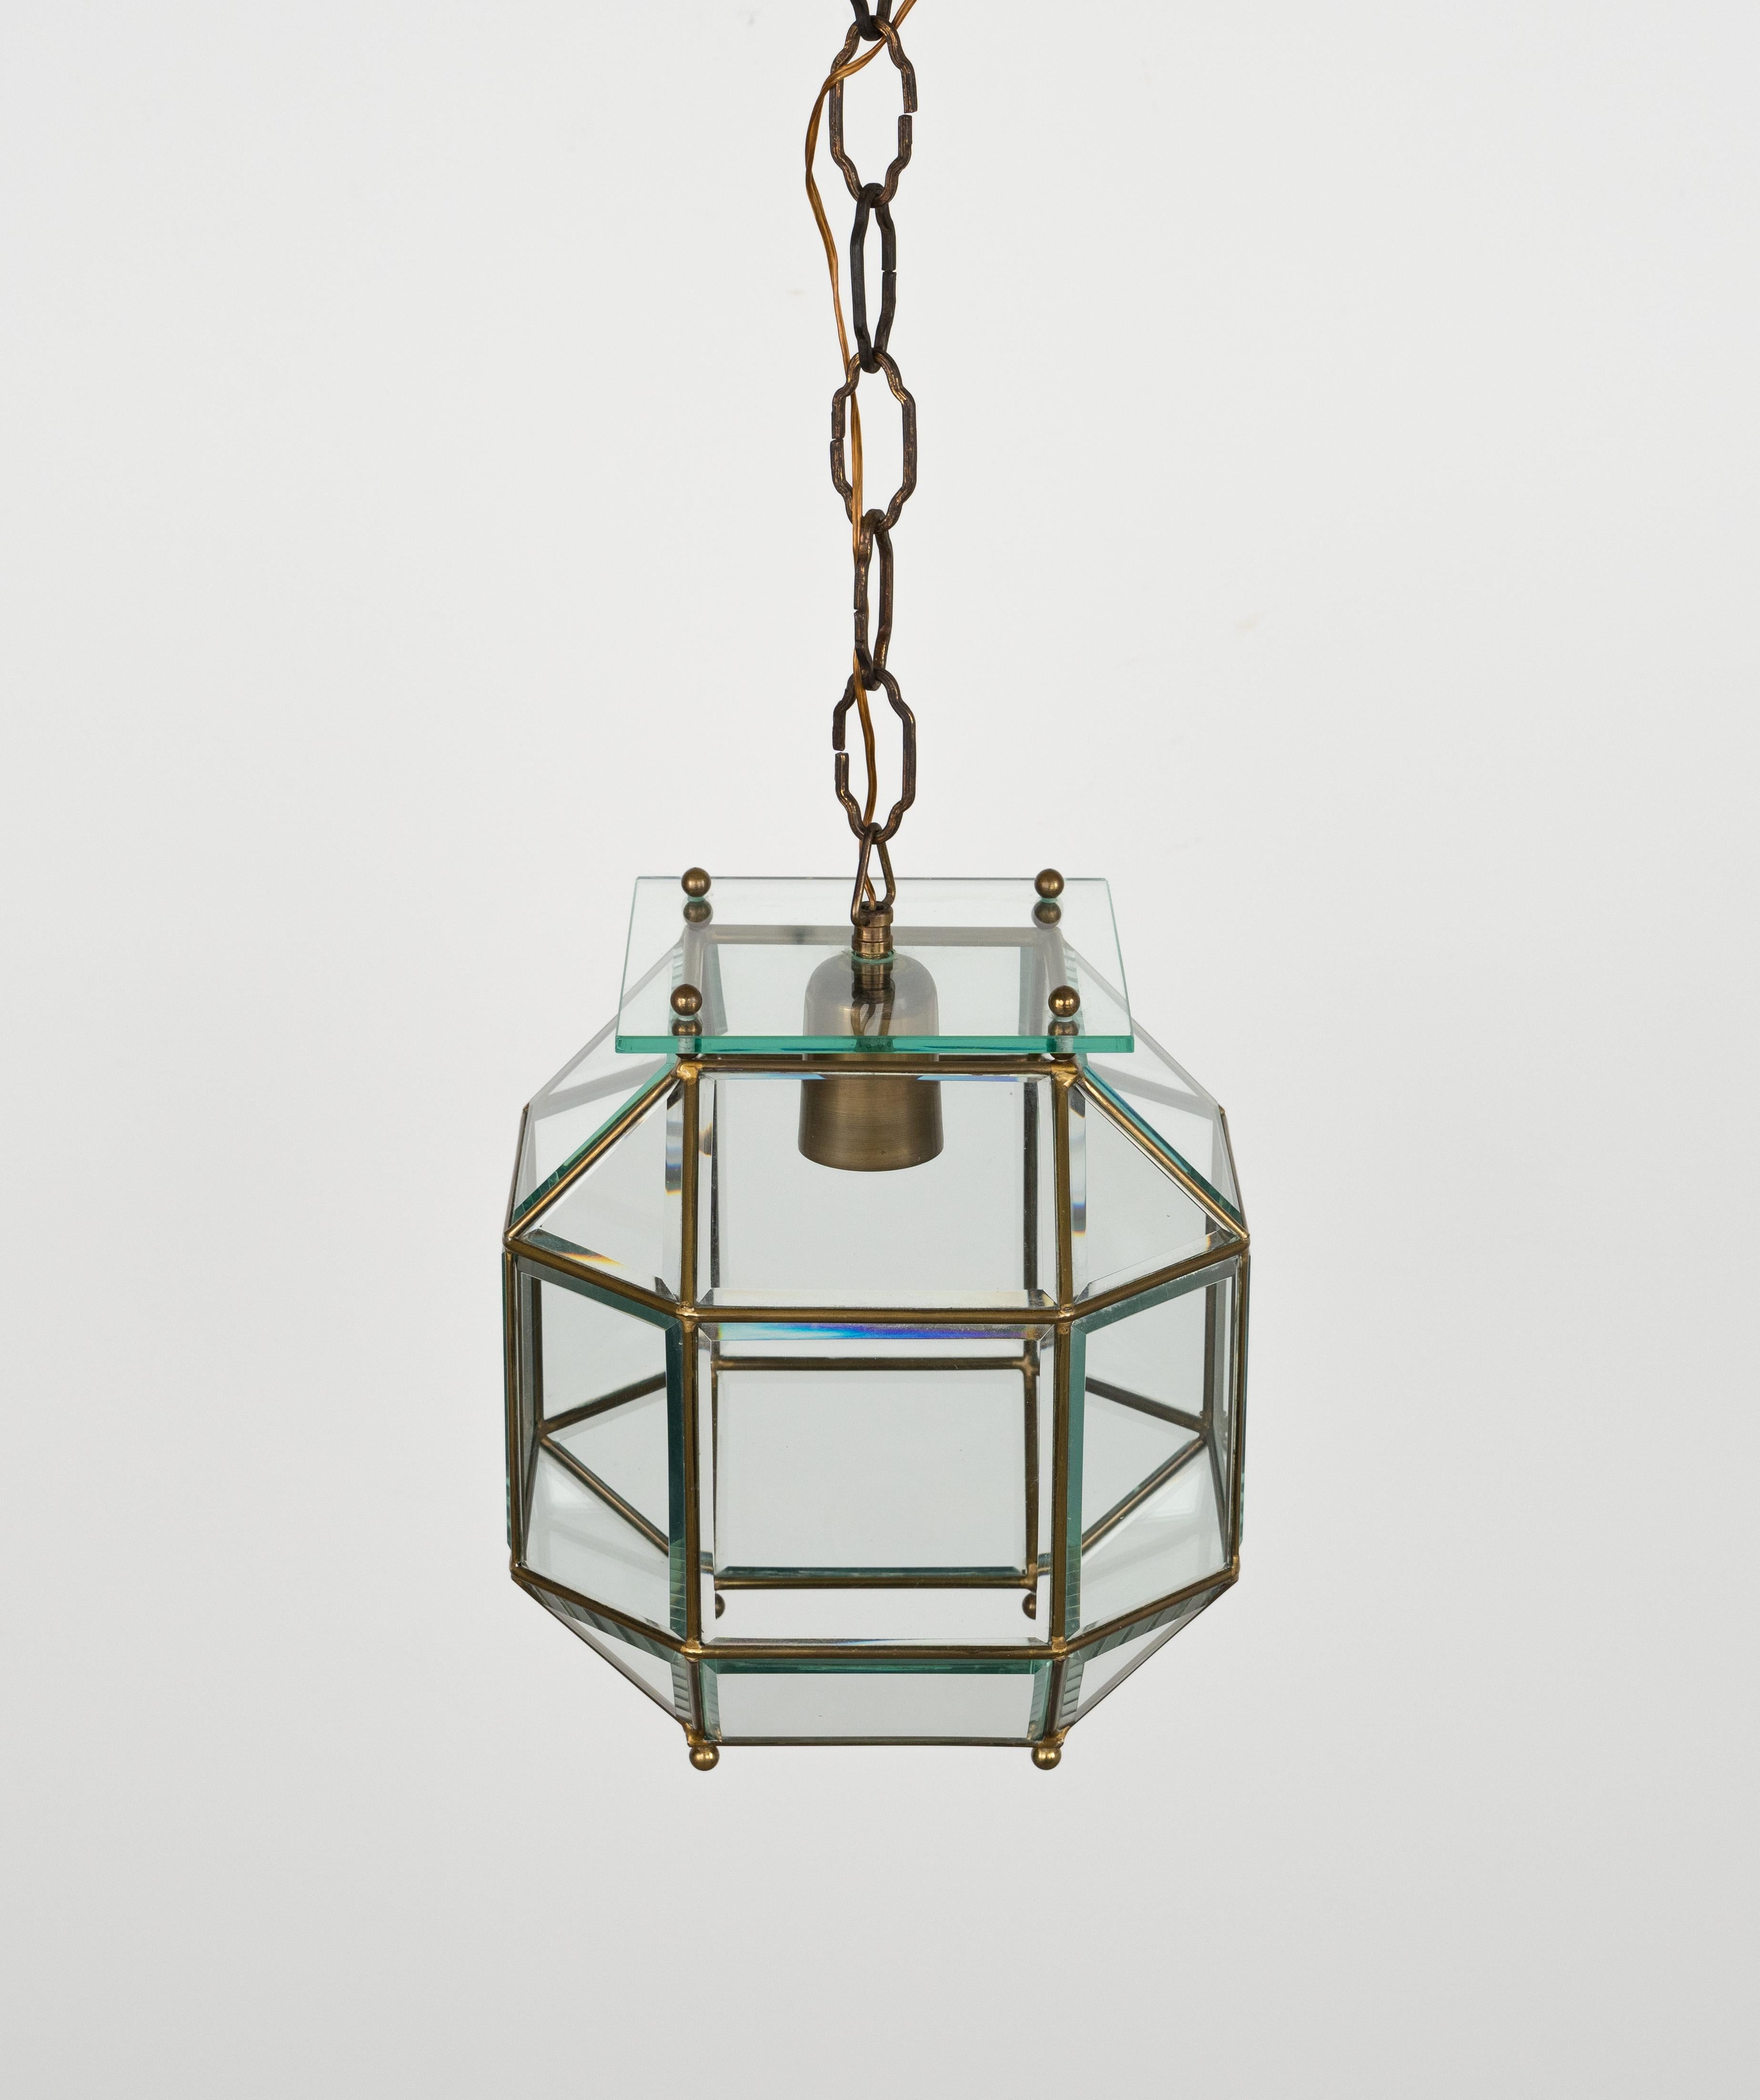 Metal Midcentury Chandelier in Brass and Beveled Glass Adolf Loos Style, Italy 1950s For Sale